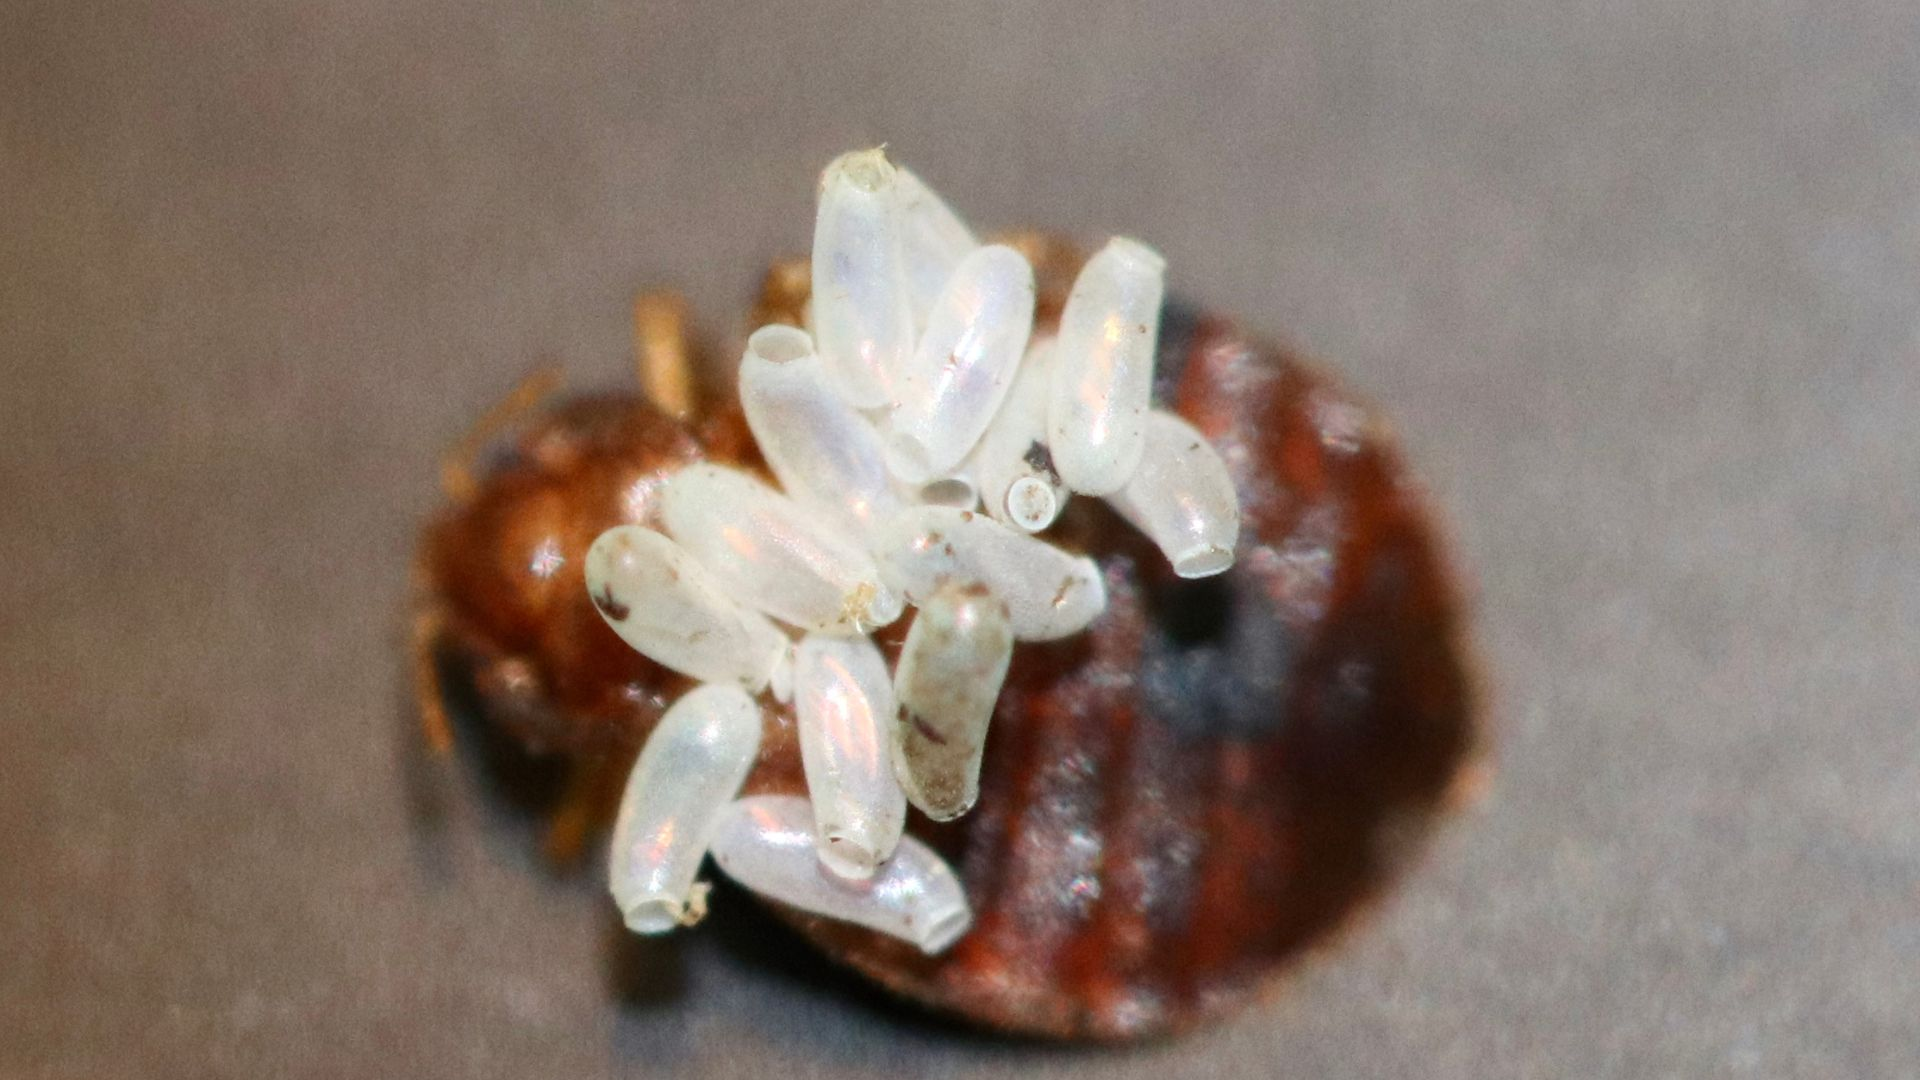 An image of a bed bug carrying eggs on its back.